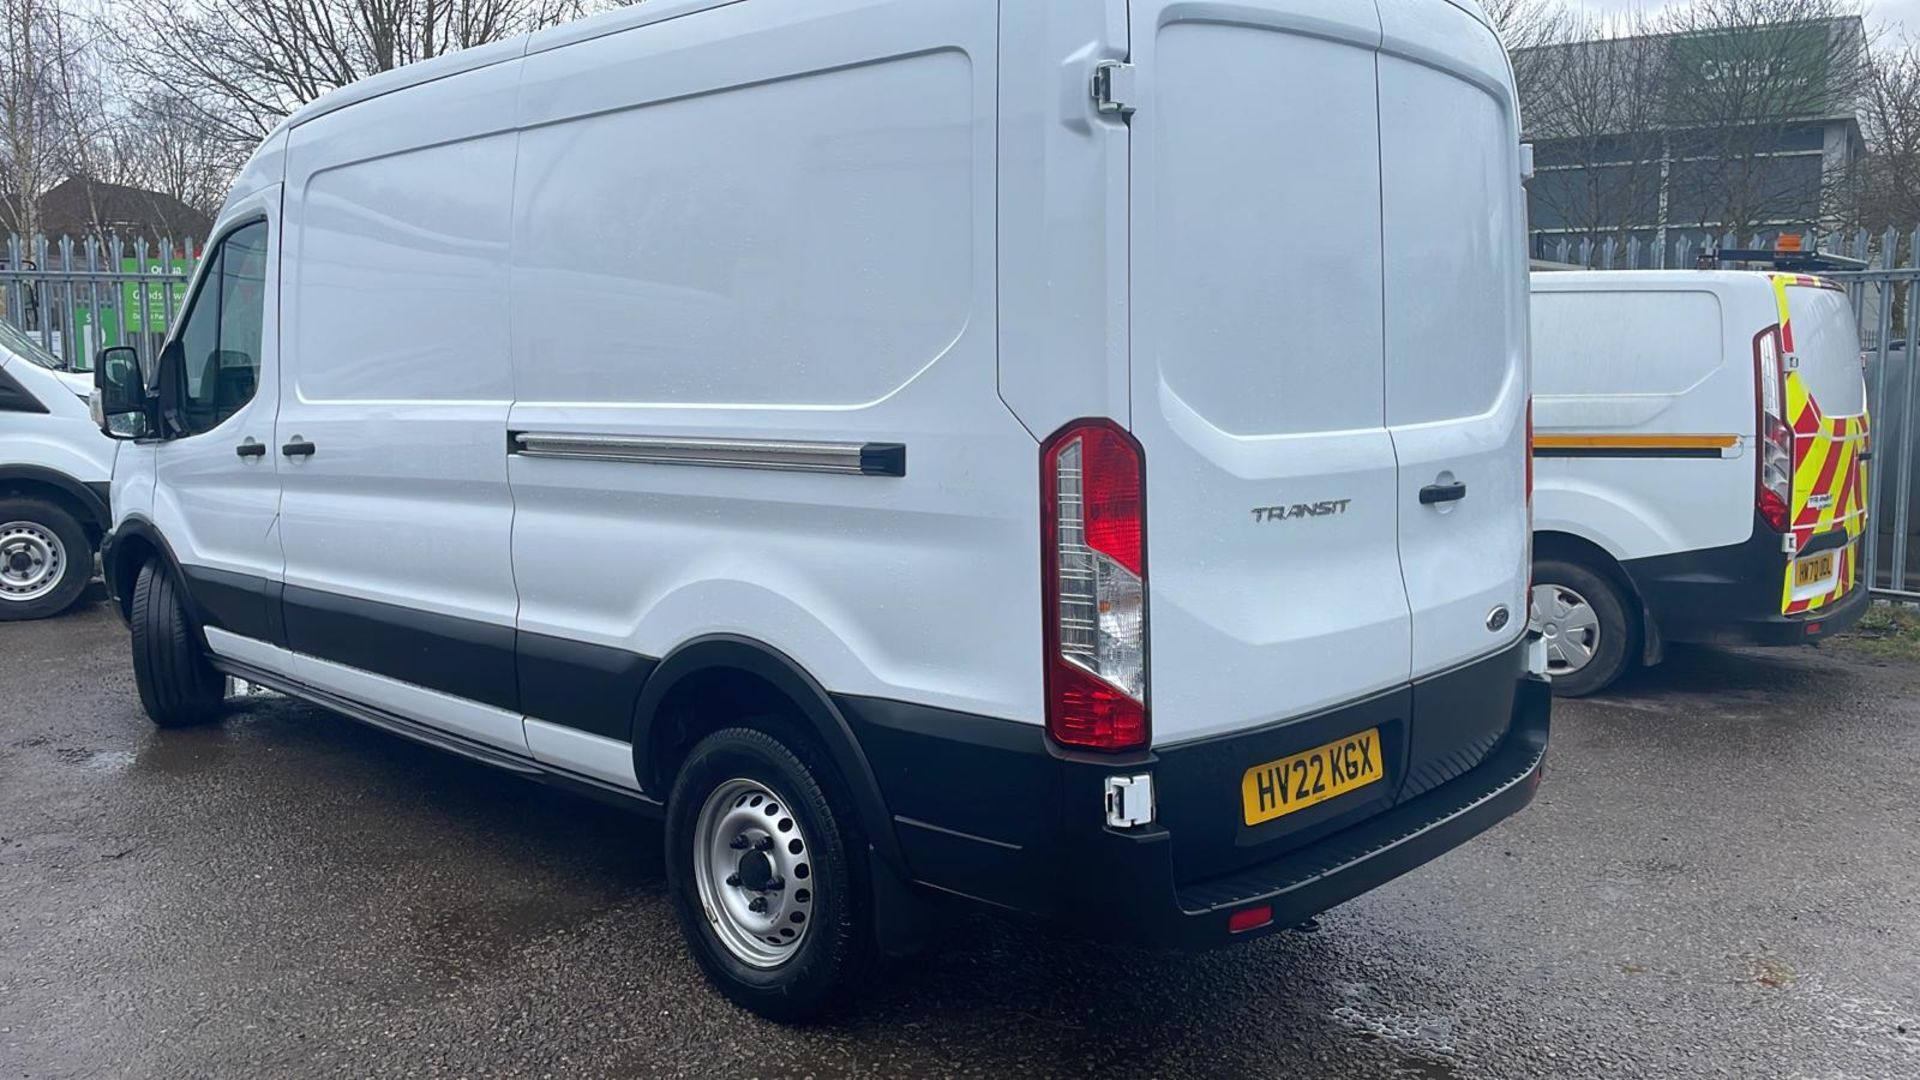 2022 22 PLATE FORD TRANSIT 350 LEADER ECO BLUE PANEL VAN - 24,186 WARRANTED MILES - FWD  - Image 3 of 9